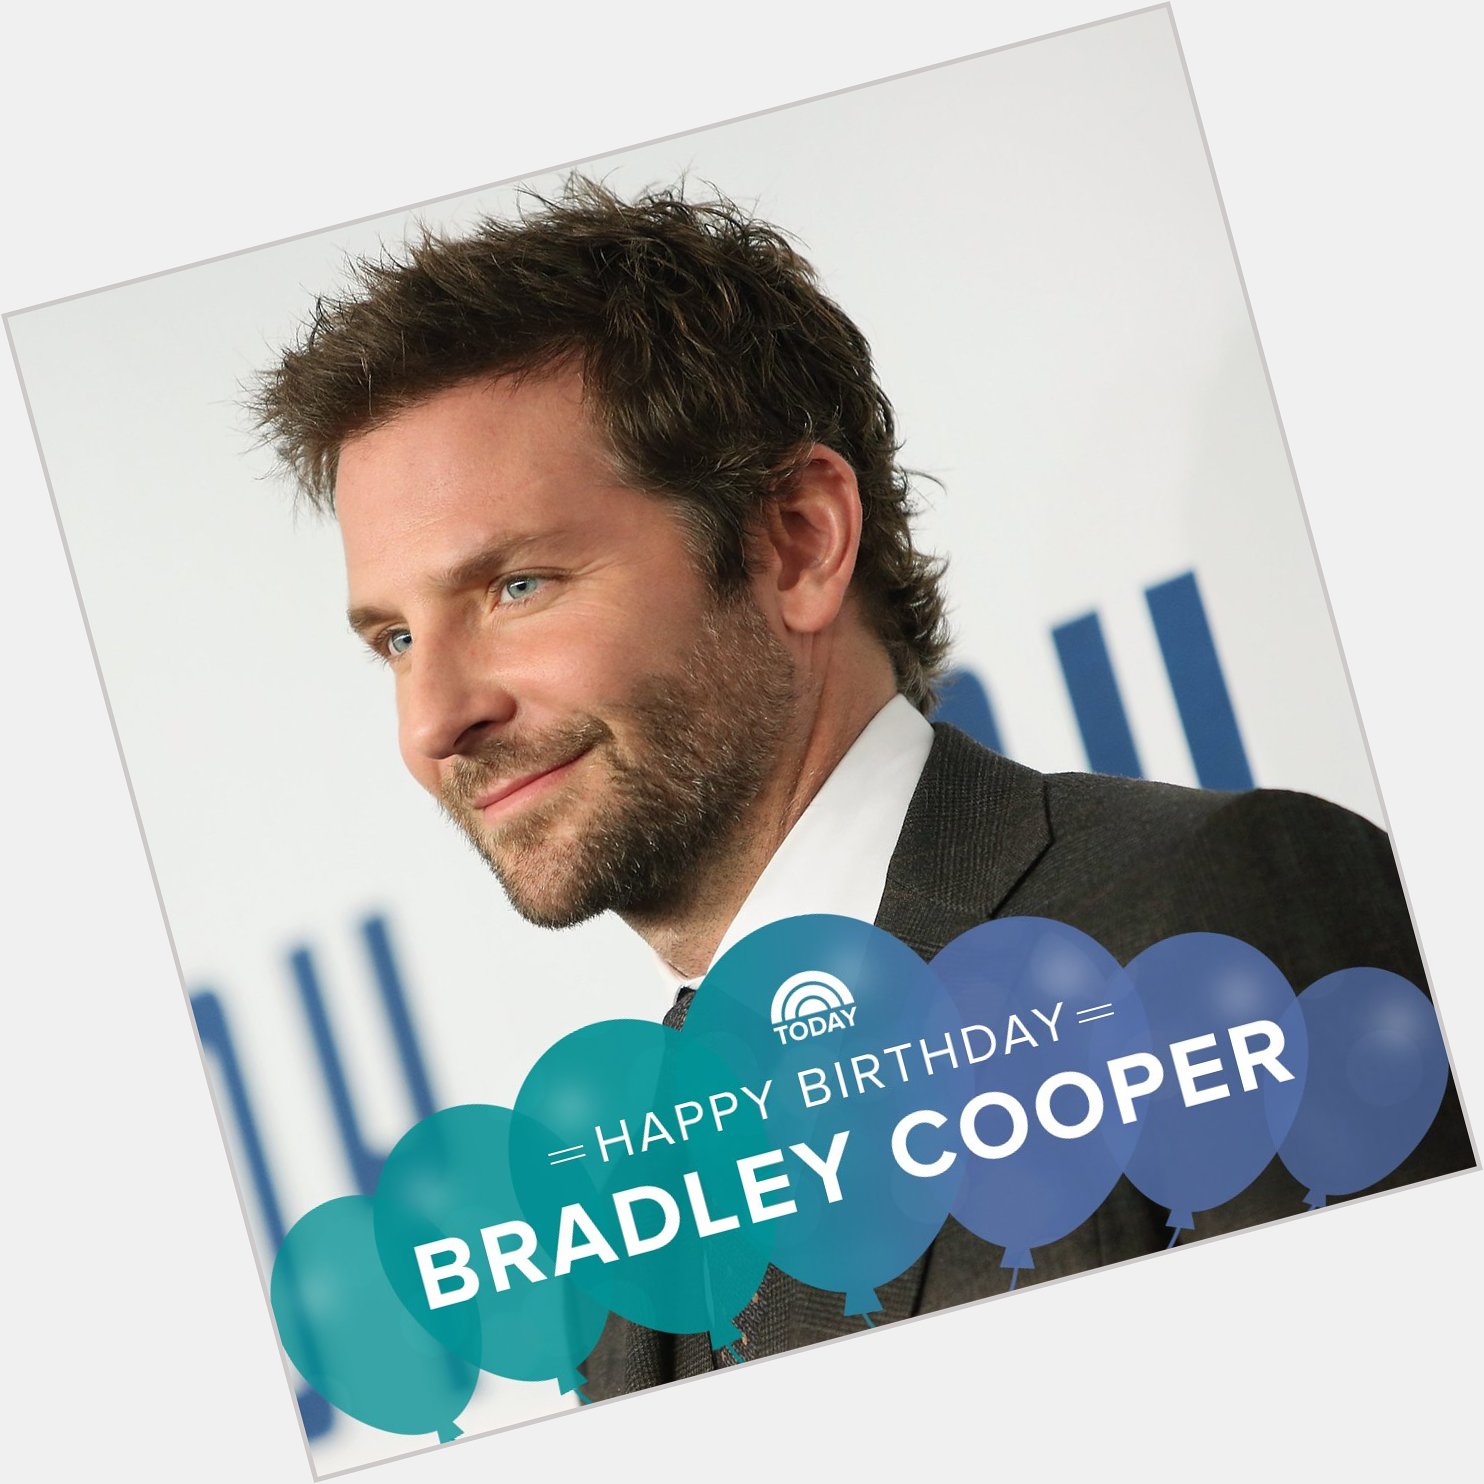 Join the Bradley Cooper team to wish him a happy birthday!      